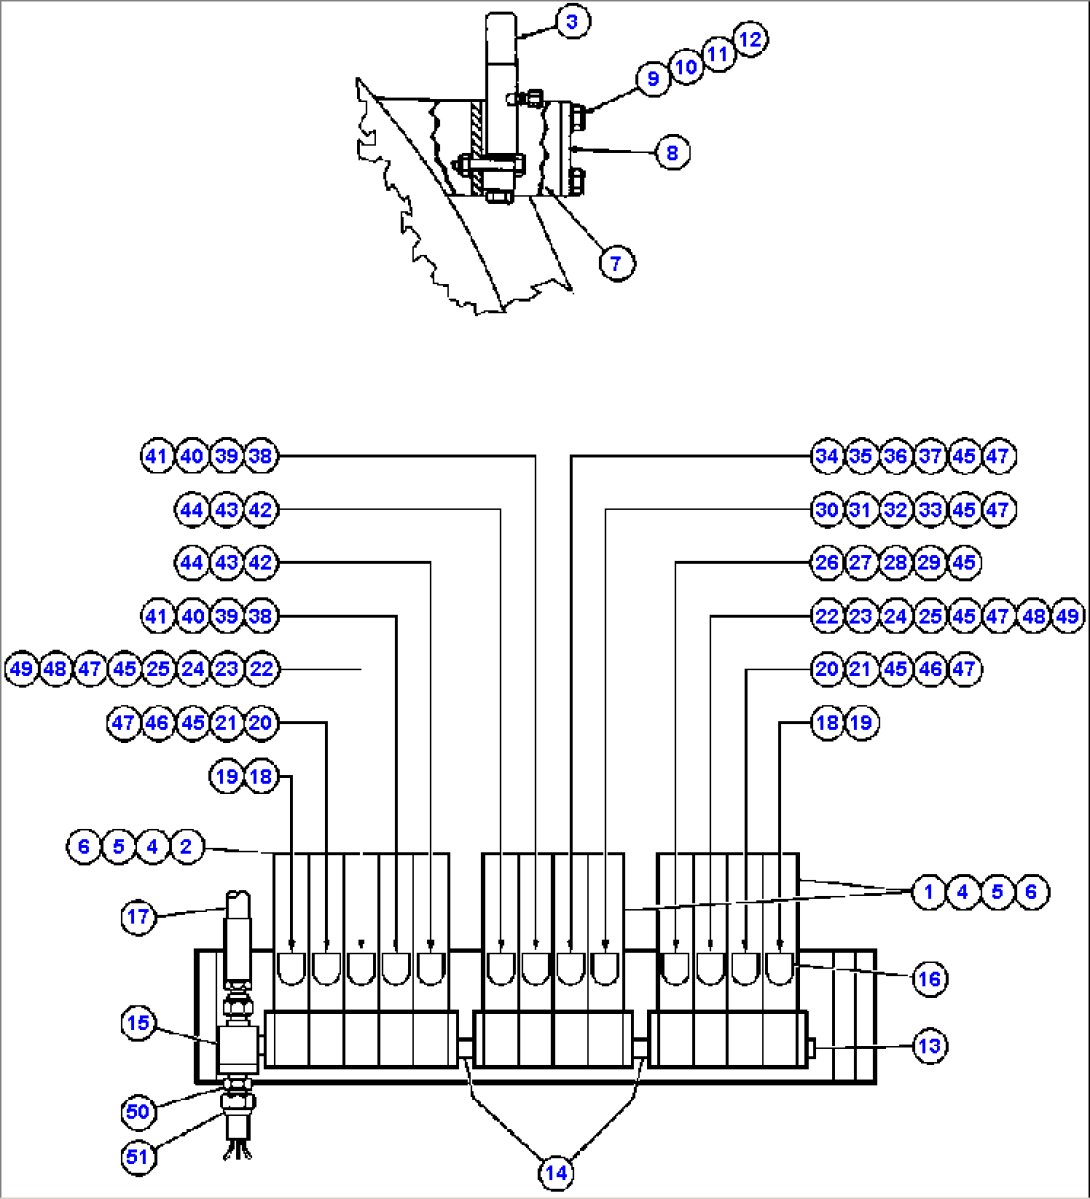 AUTOMATIC LUBRICATION SYSTEM